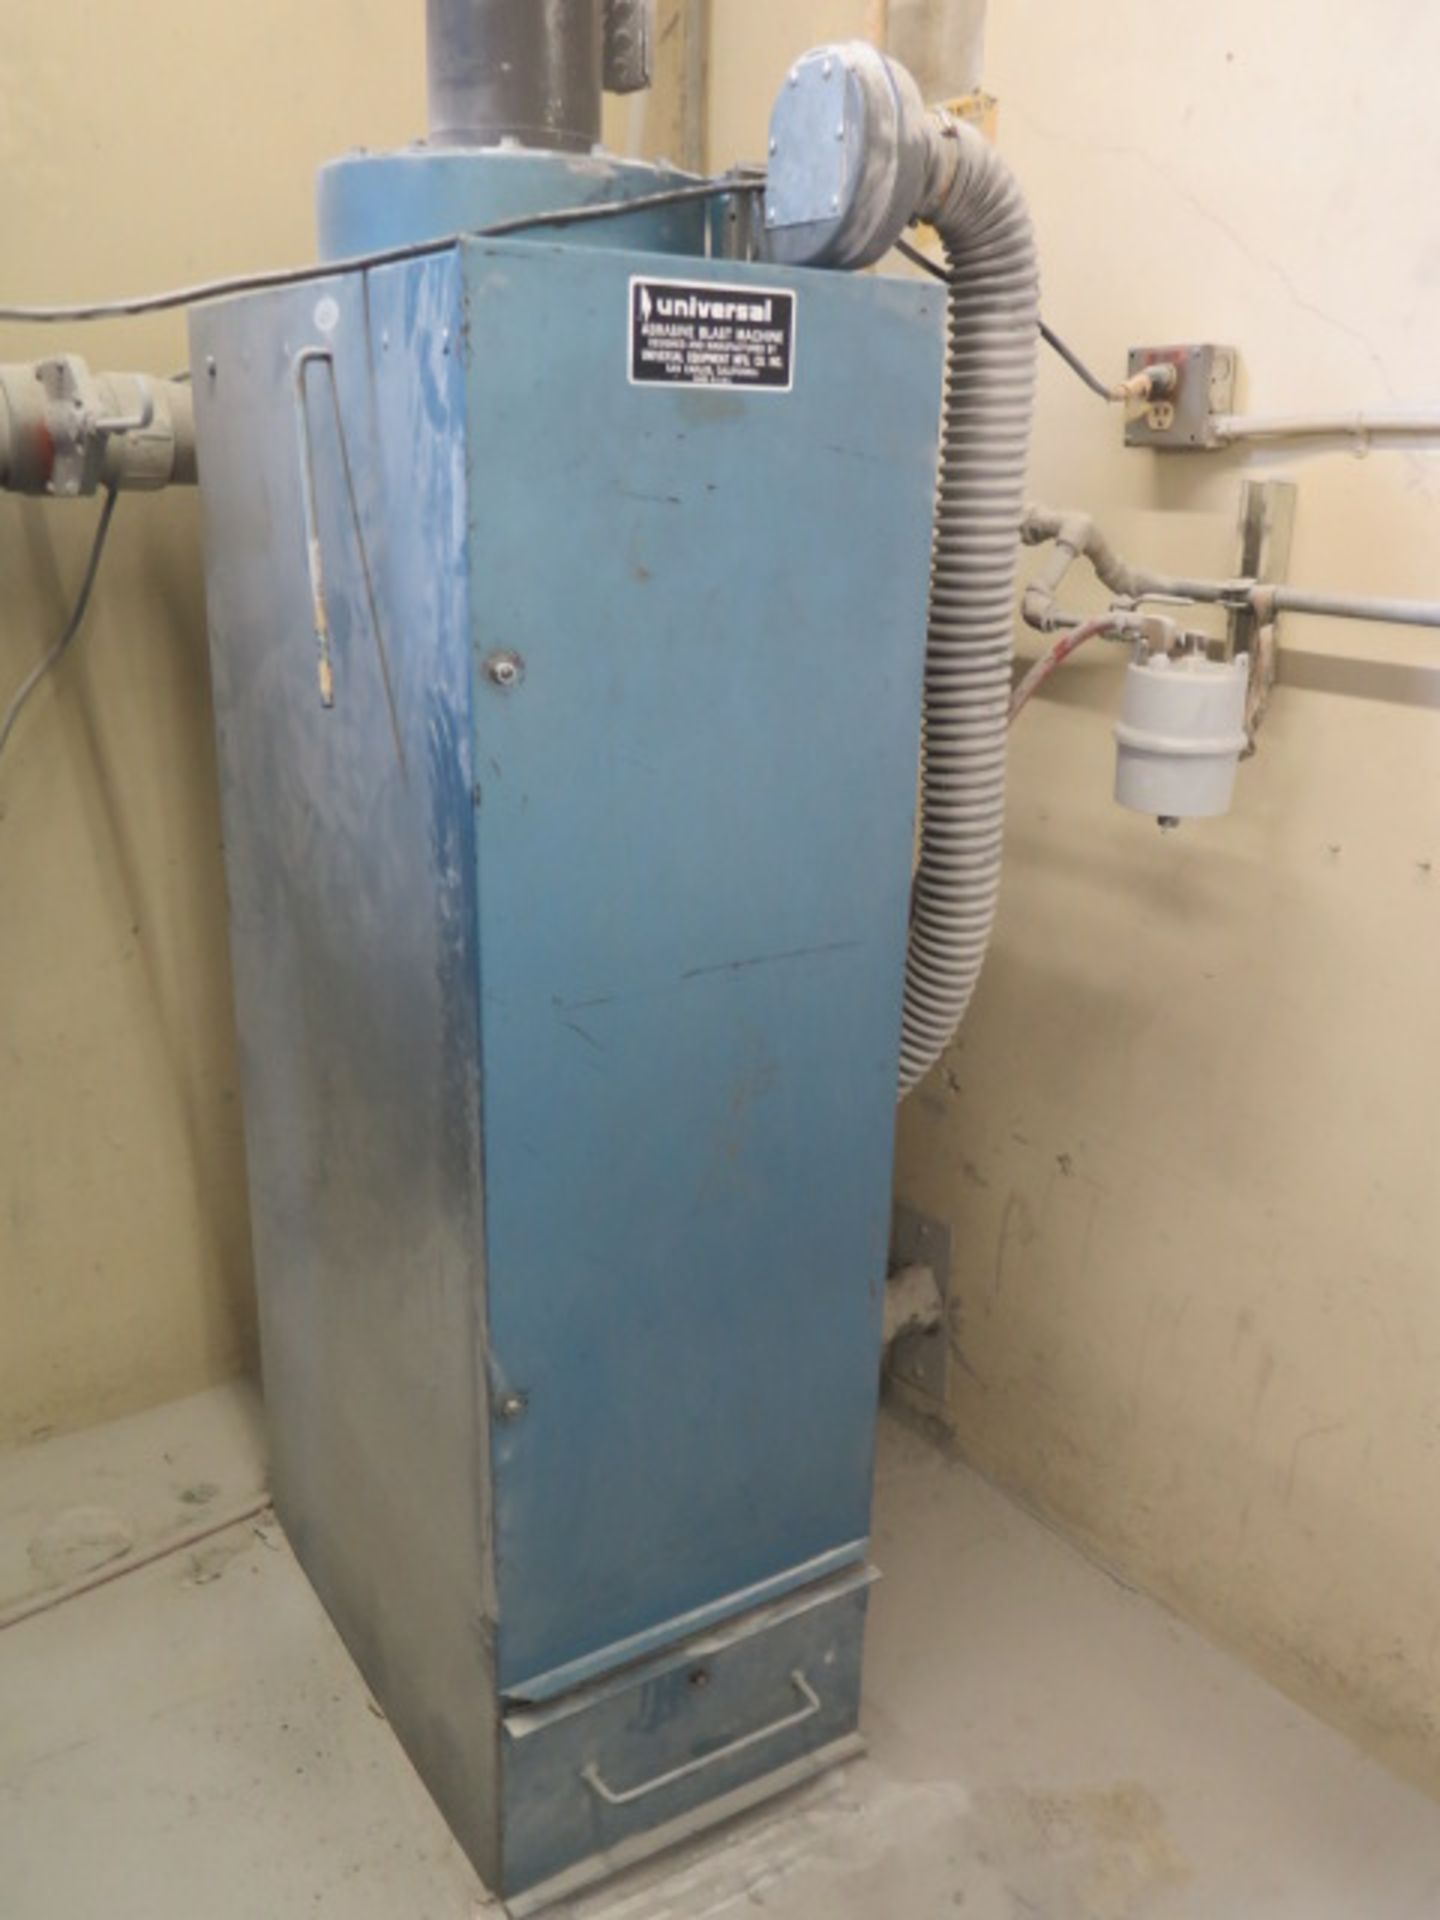 Universal Dry Blast Cabinet w/ Dust Collector - Image 4 of 4